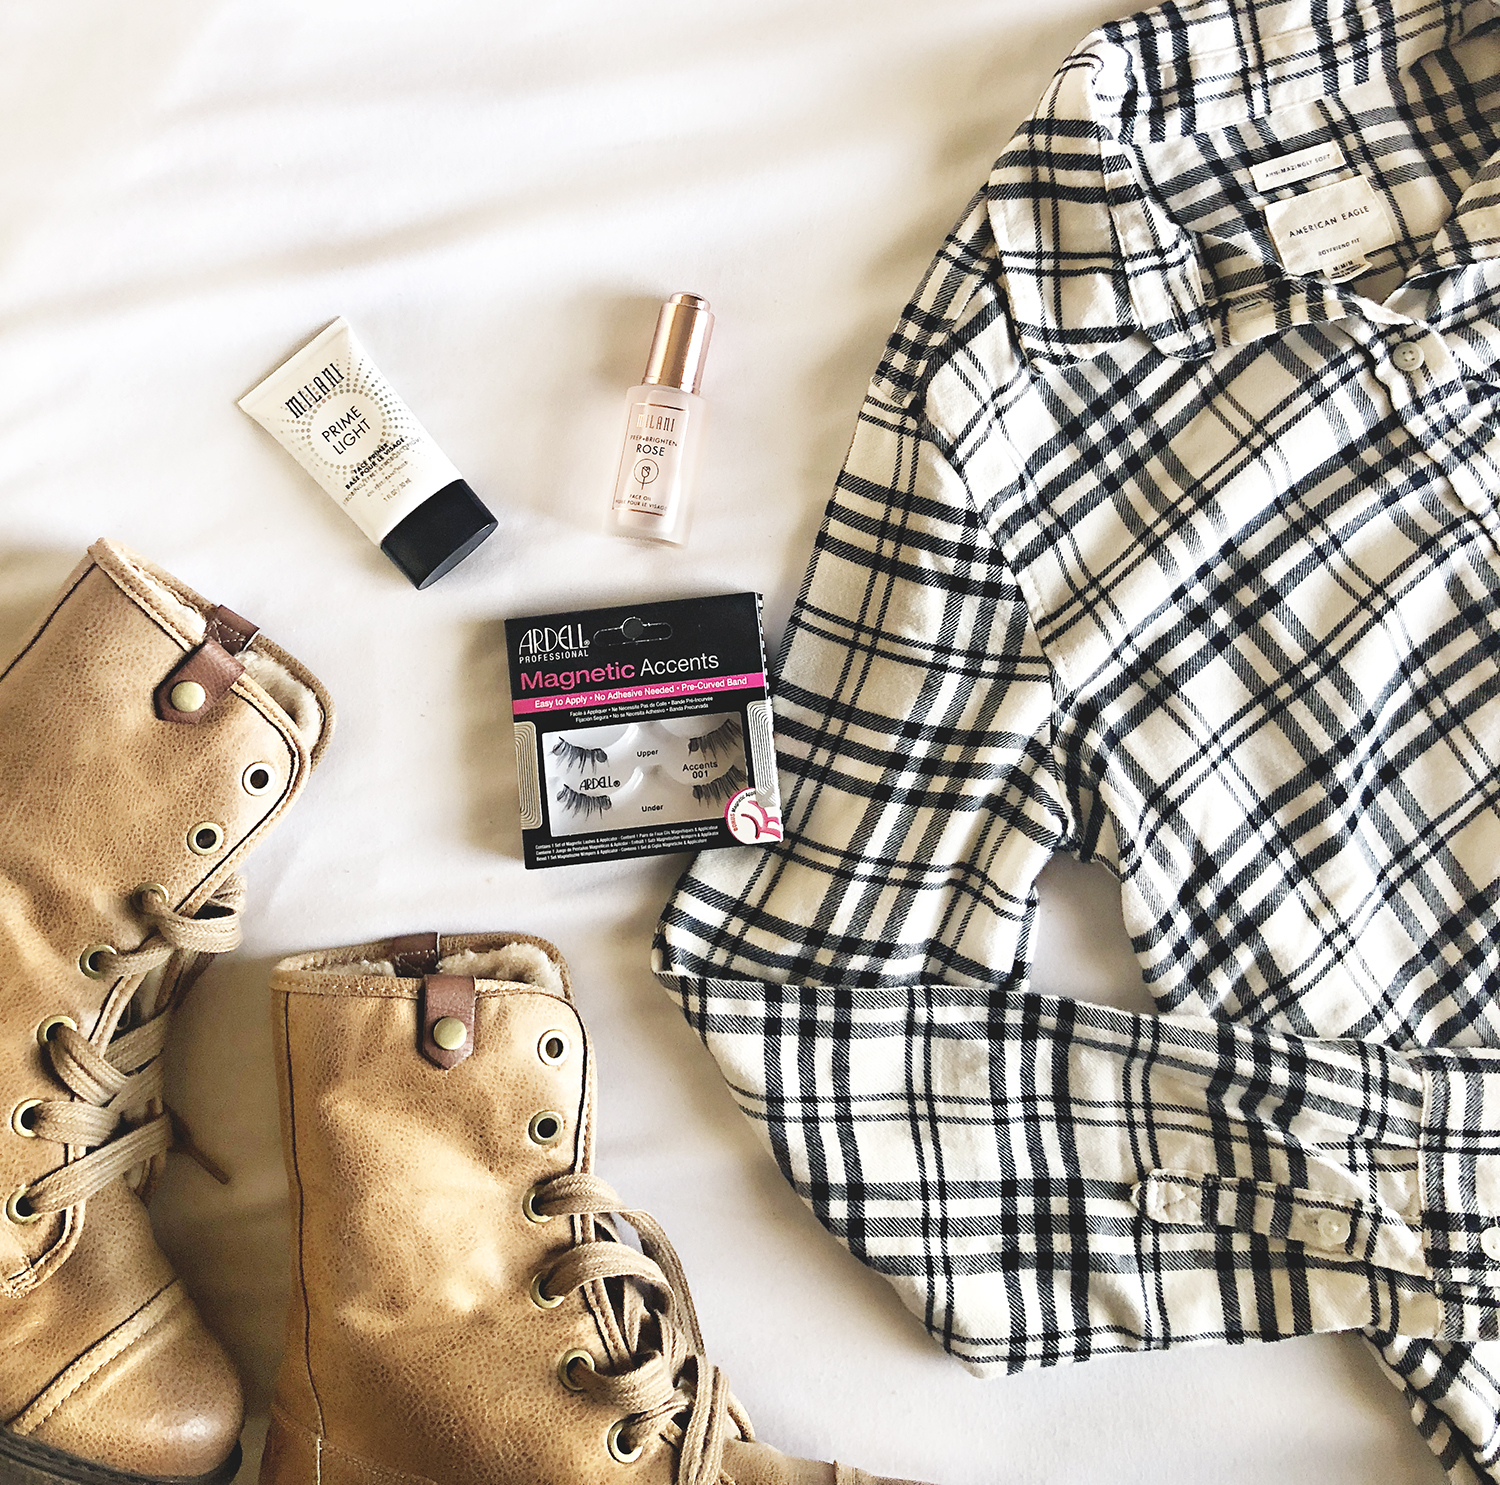 Sharing my latest finds and obsessions for the month of March! From the softest plaid button down to new drugstore makeup finds... you are going to love them! #Milani #MilaniMakeup #Americanagle #Roxy #Boots #ArdellMagneticAccents #FashionFinds #StyleFinds